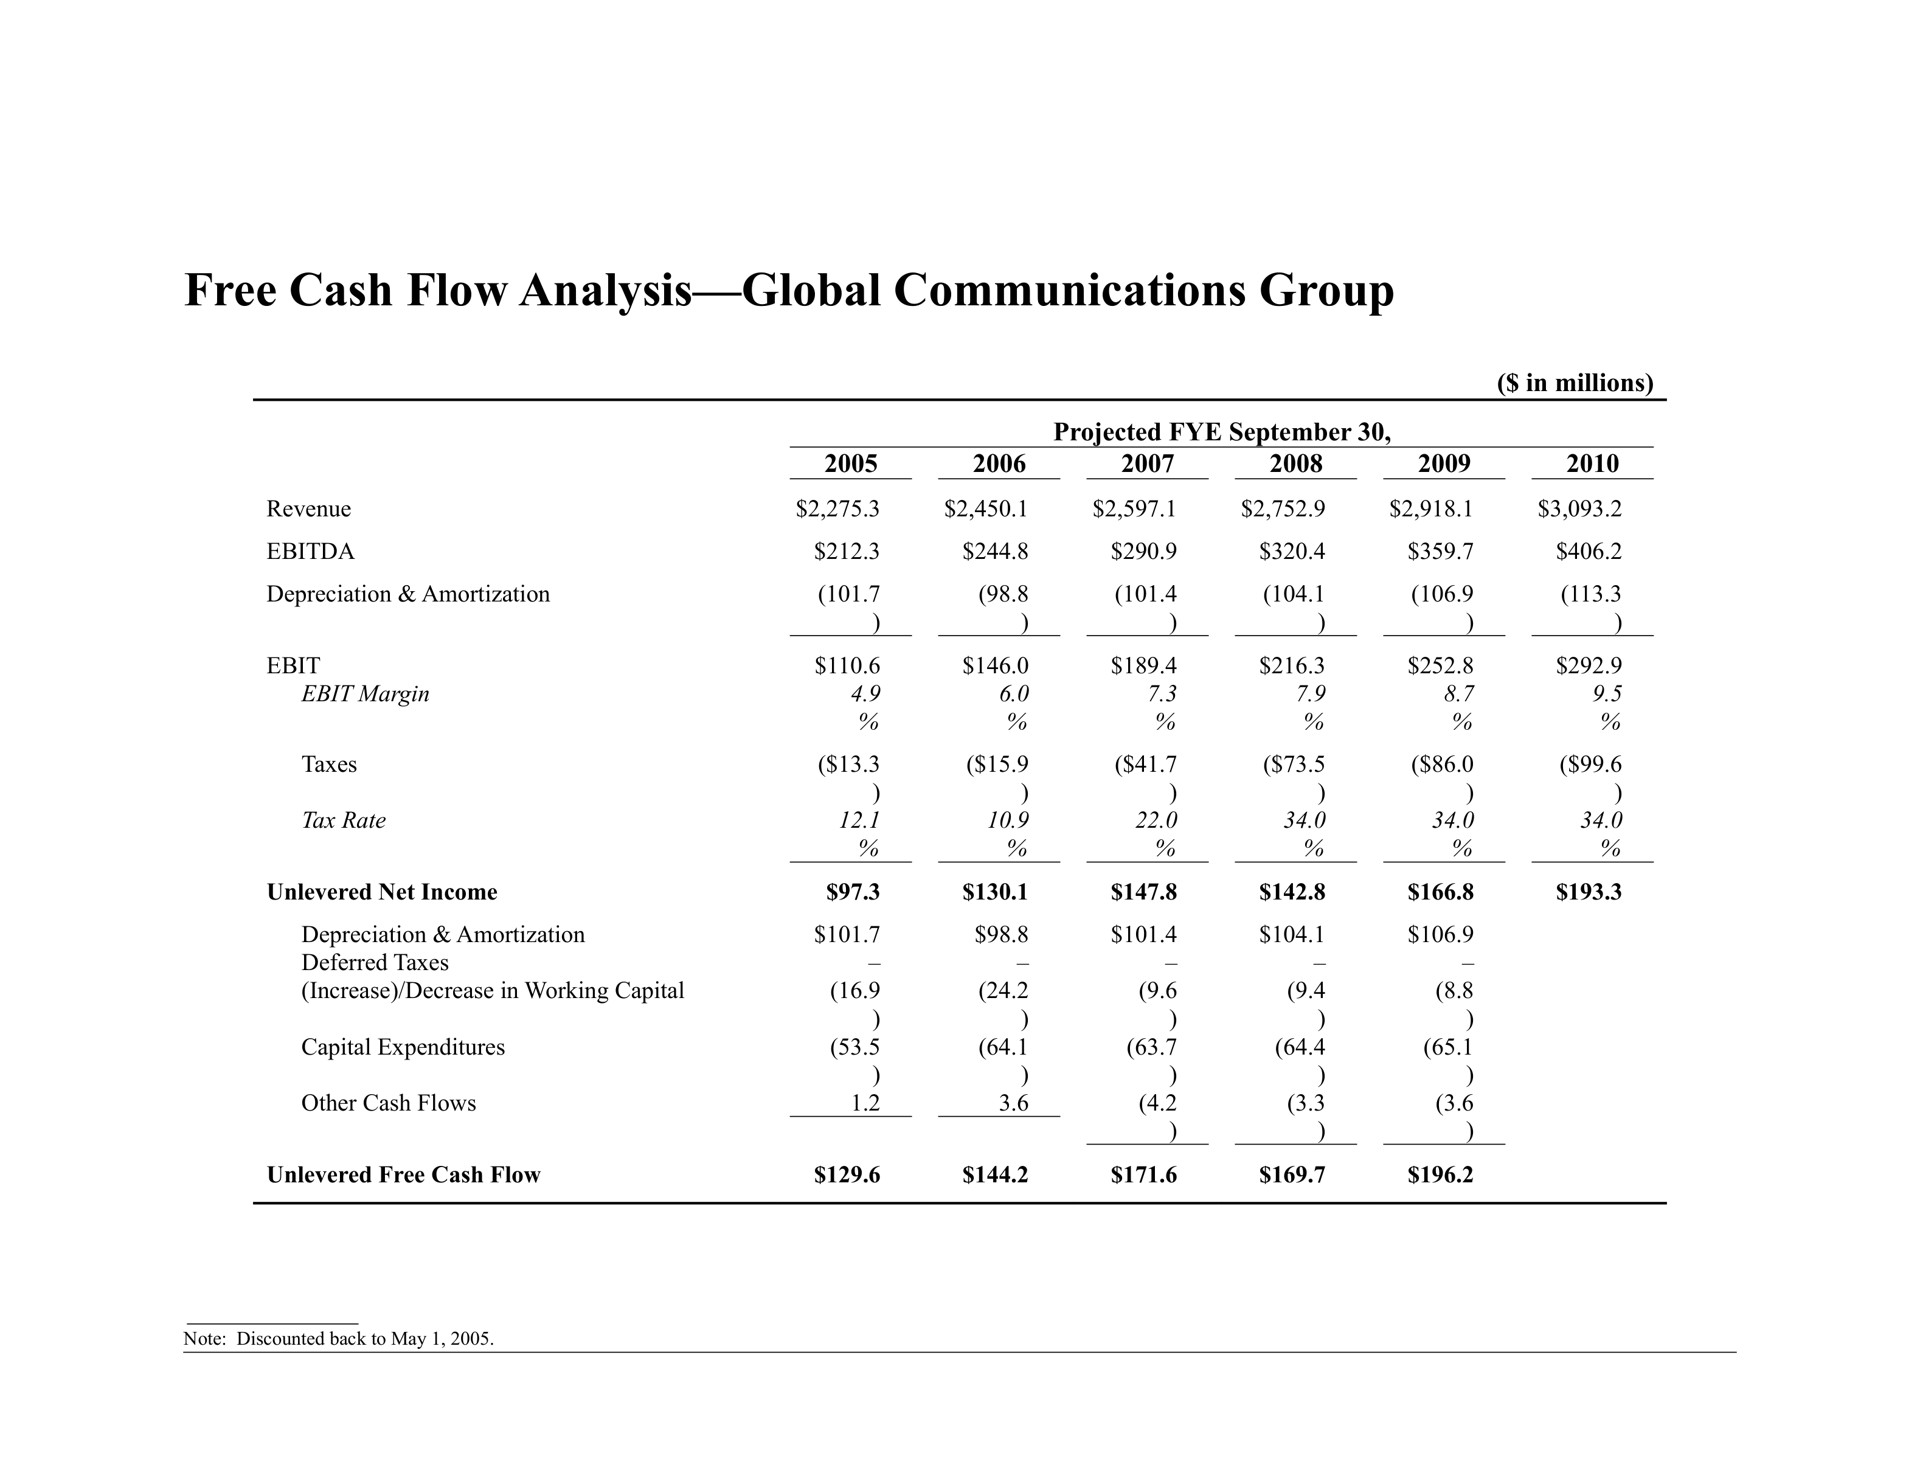 free cash flow analysis global communications group | Bear Stearns